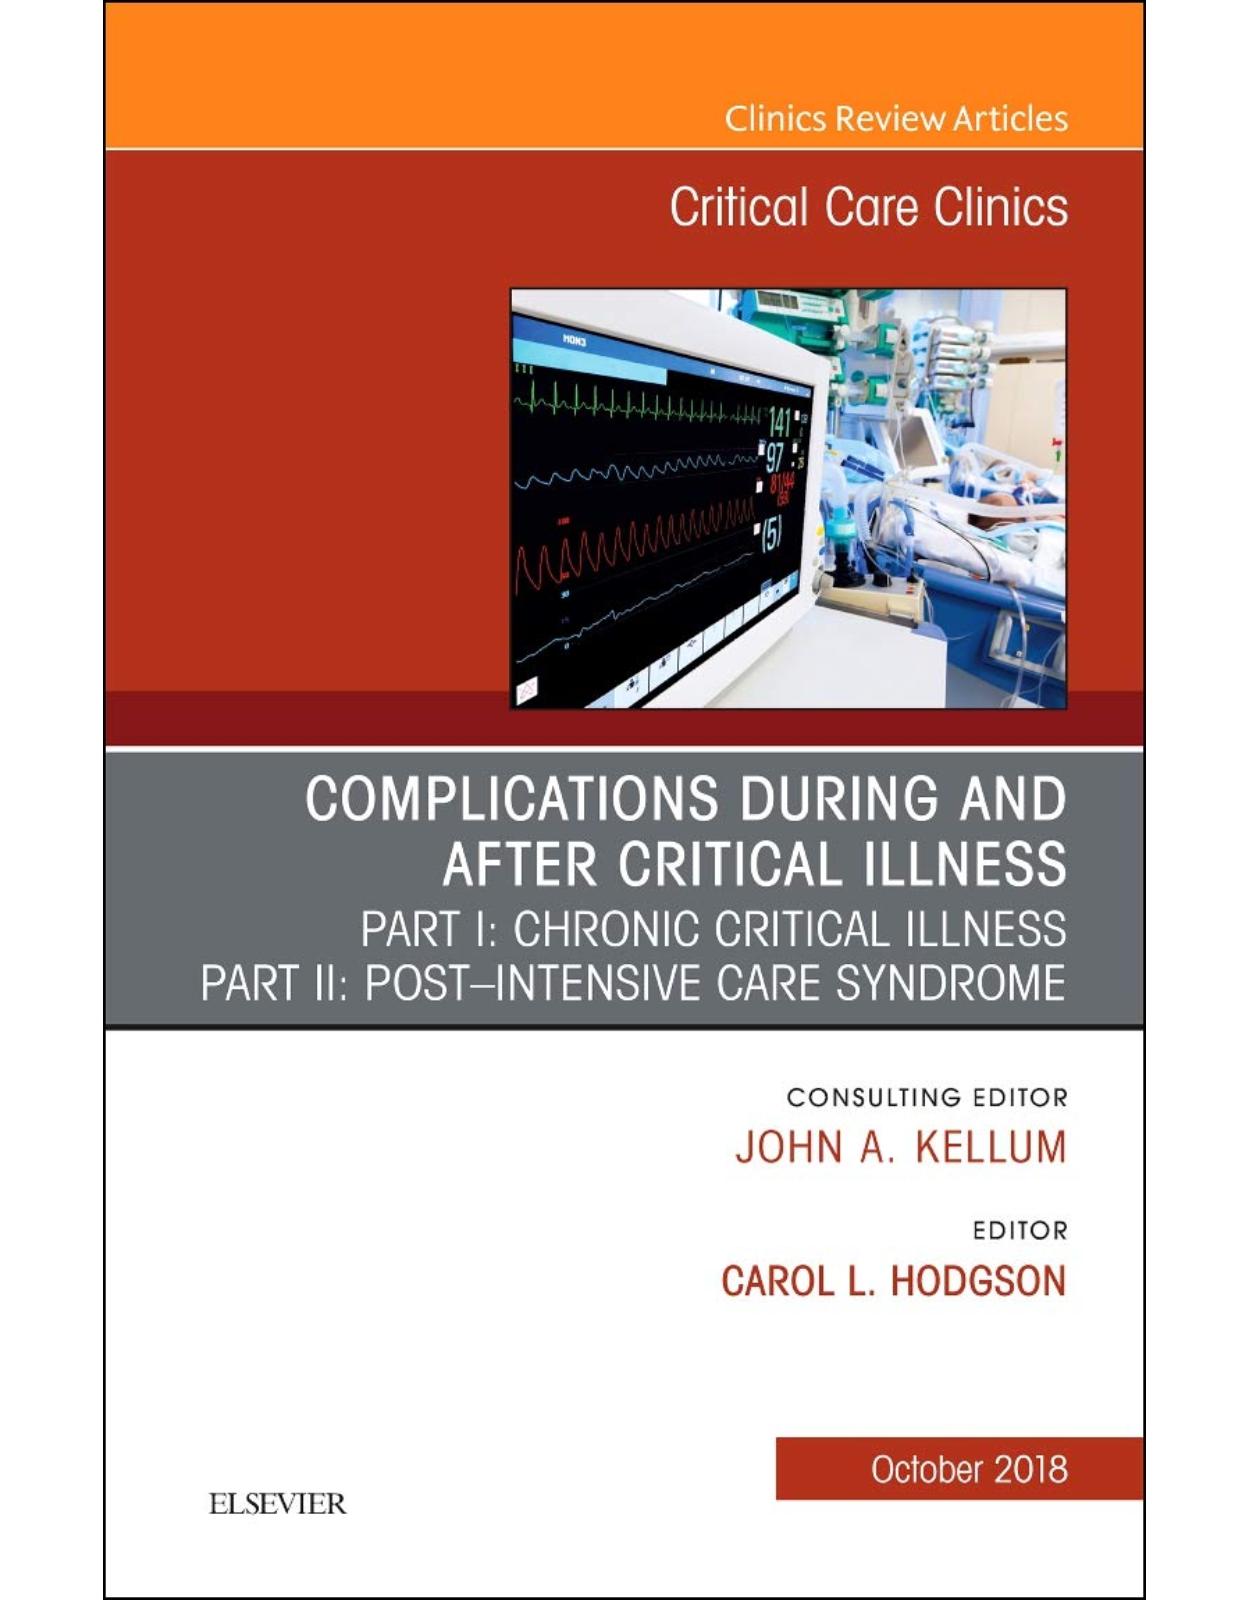 Post-intensive Care Syndrome & Chronic Critical Illness, An Issue of Critical Care Clinics, Volume 34-4